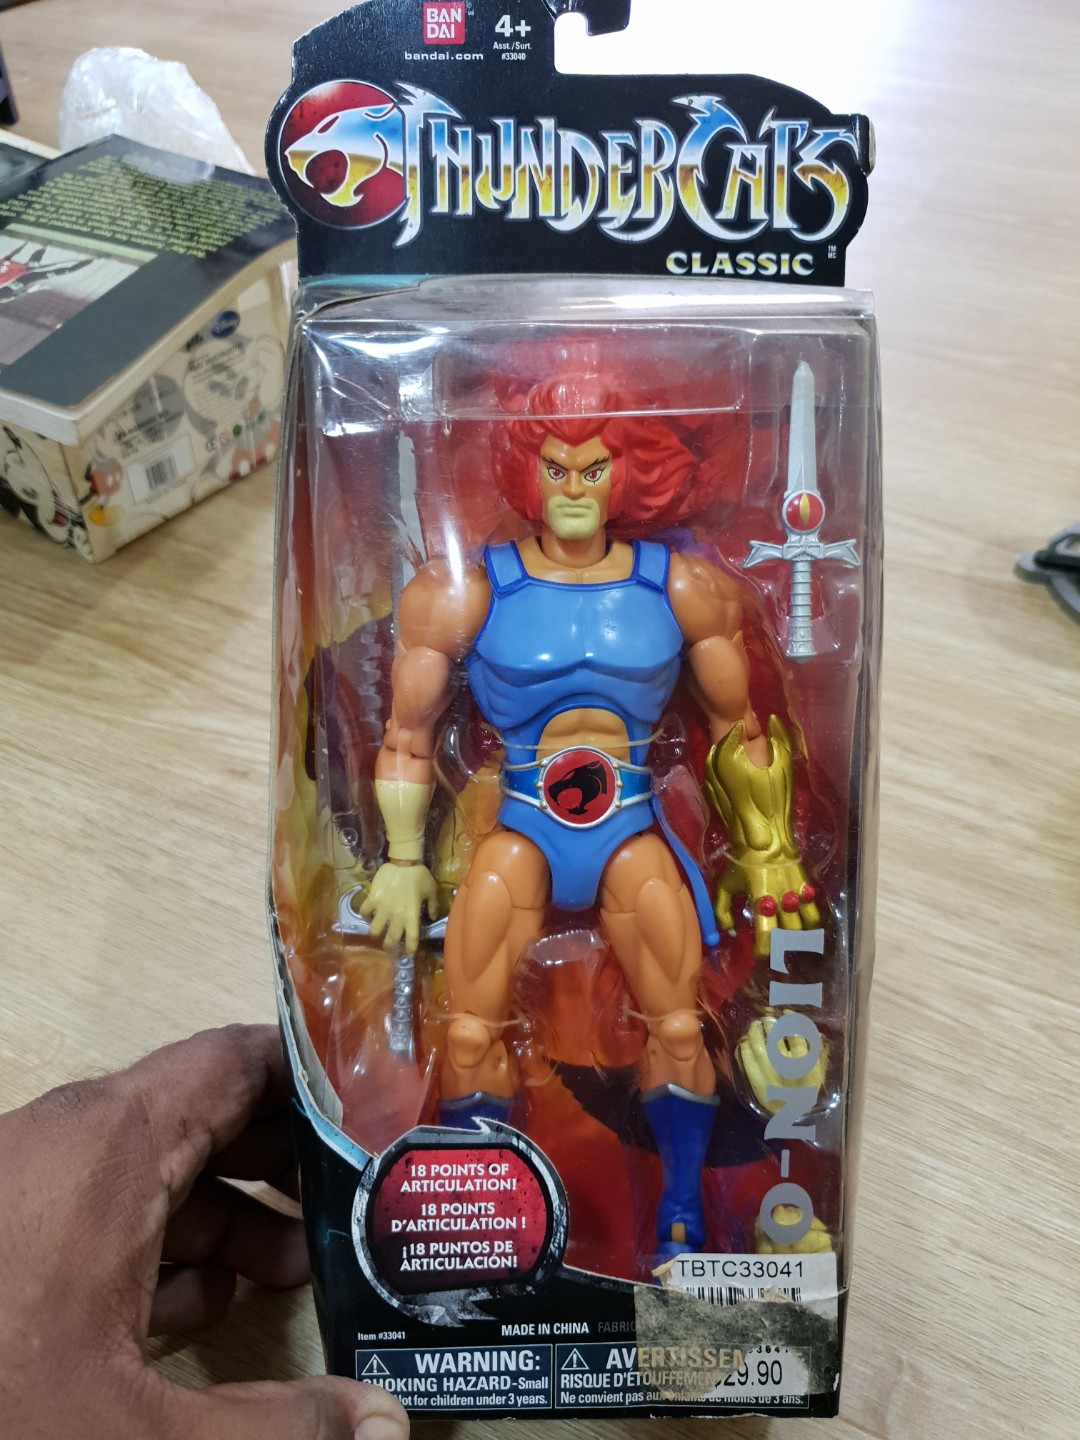 Thundercats Bandai Classic 8 Inch Super Articulation Action Figure Lion O MISB 